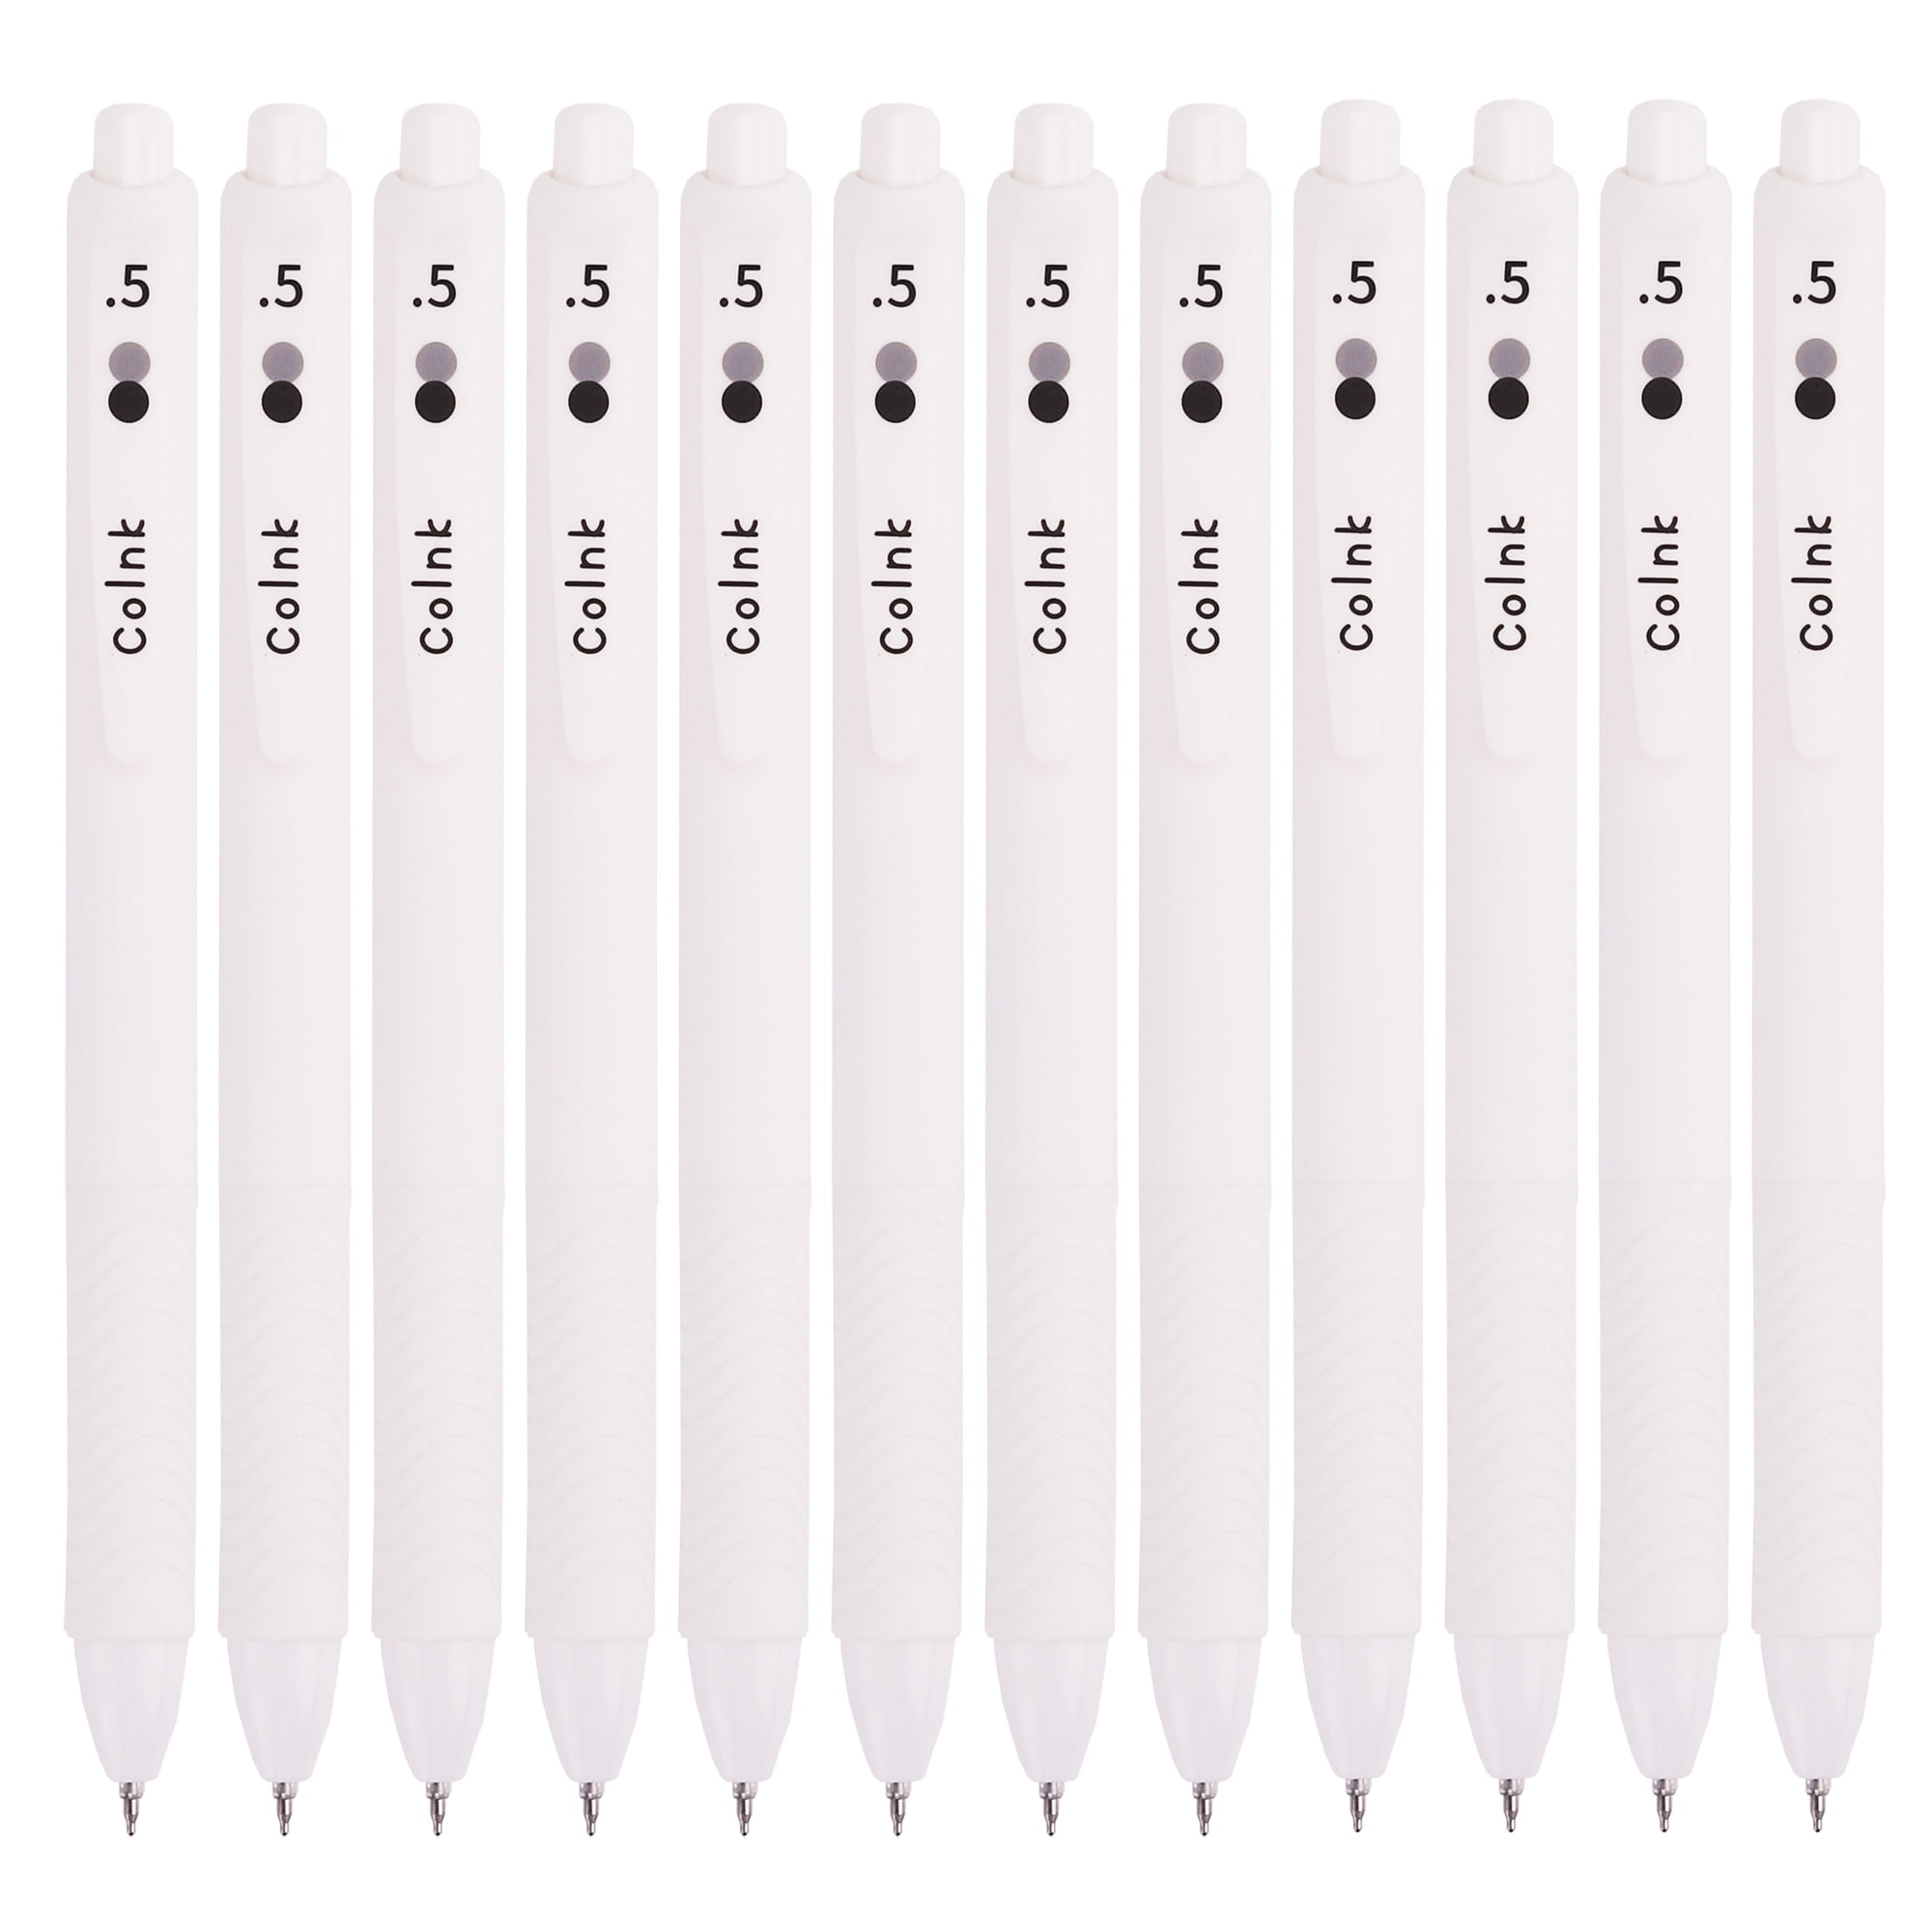 COLNK Mechanical Pencil Set for Office School Supplies,0.5mm Drawing Pencils for Students Kids, White Barrel, Counts 10